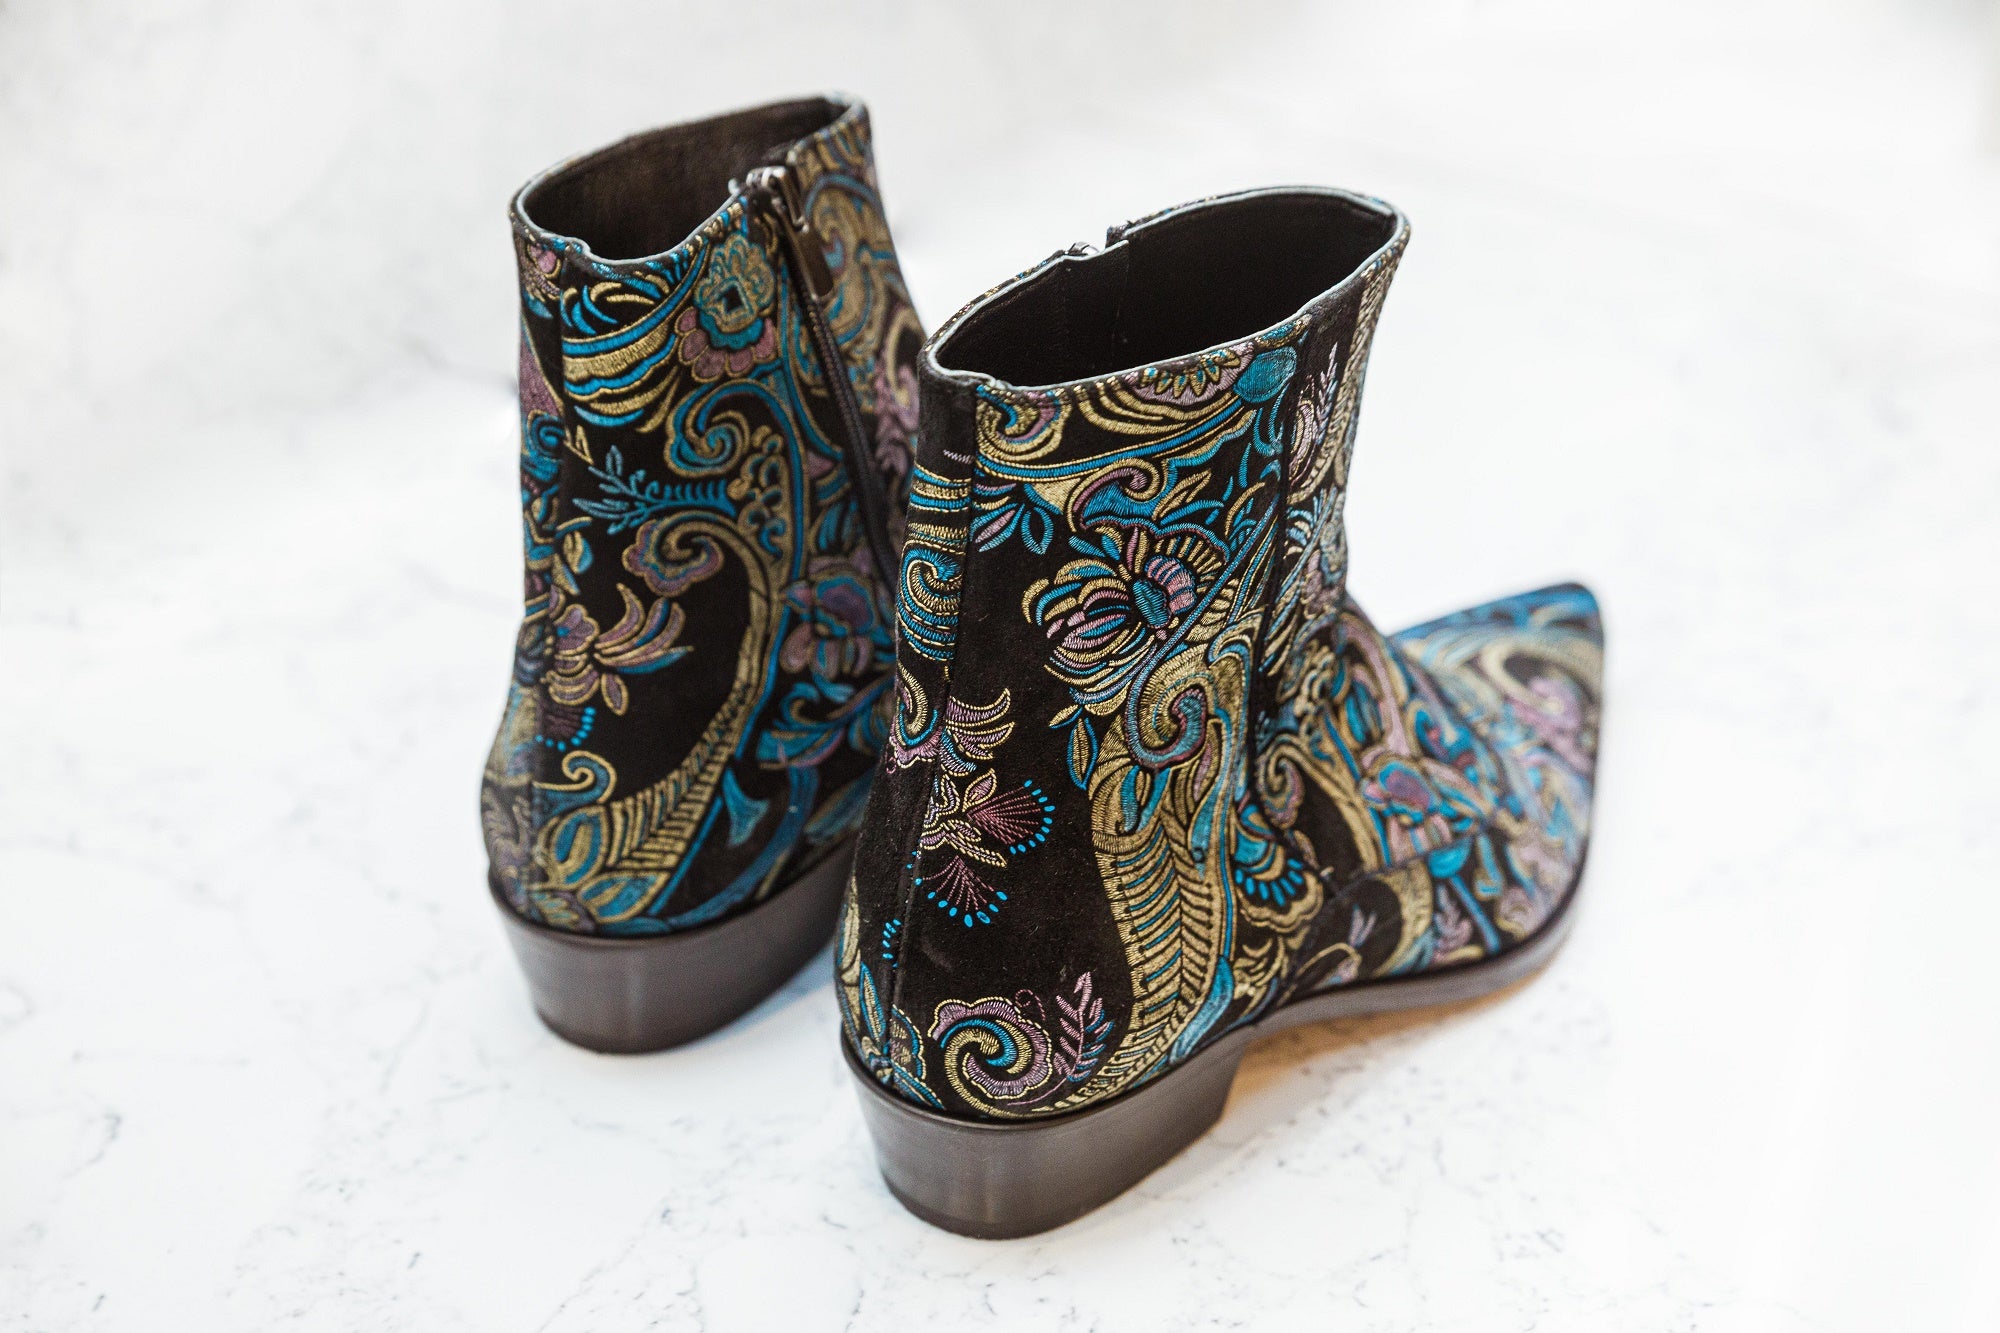 The Bohemia Boots - Shoes by Urbbana